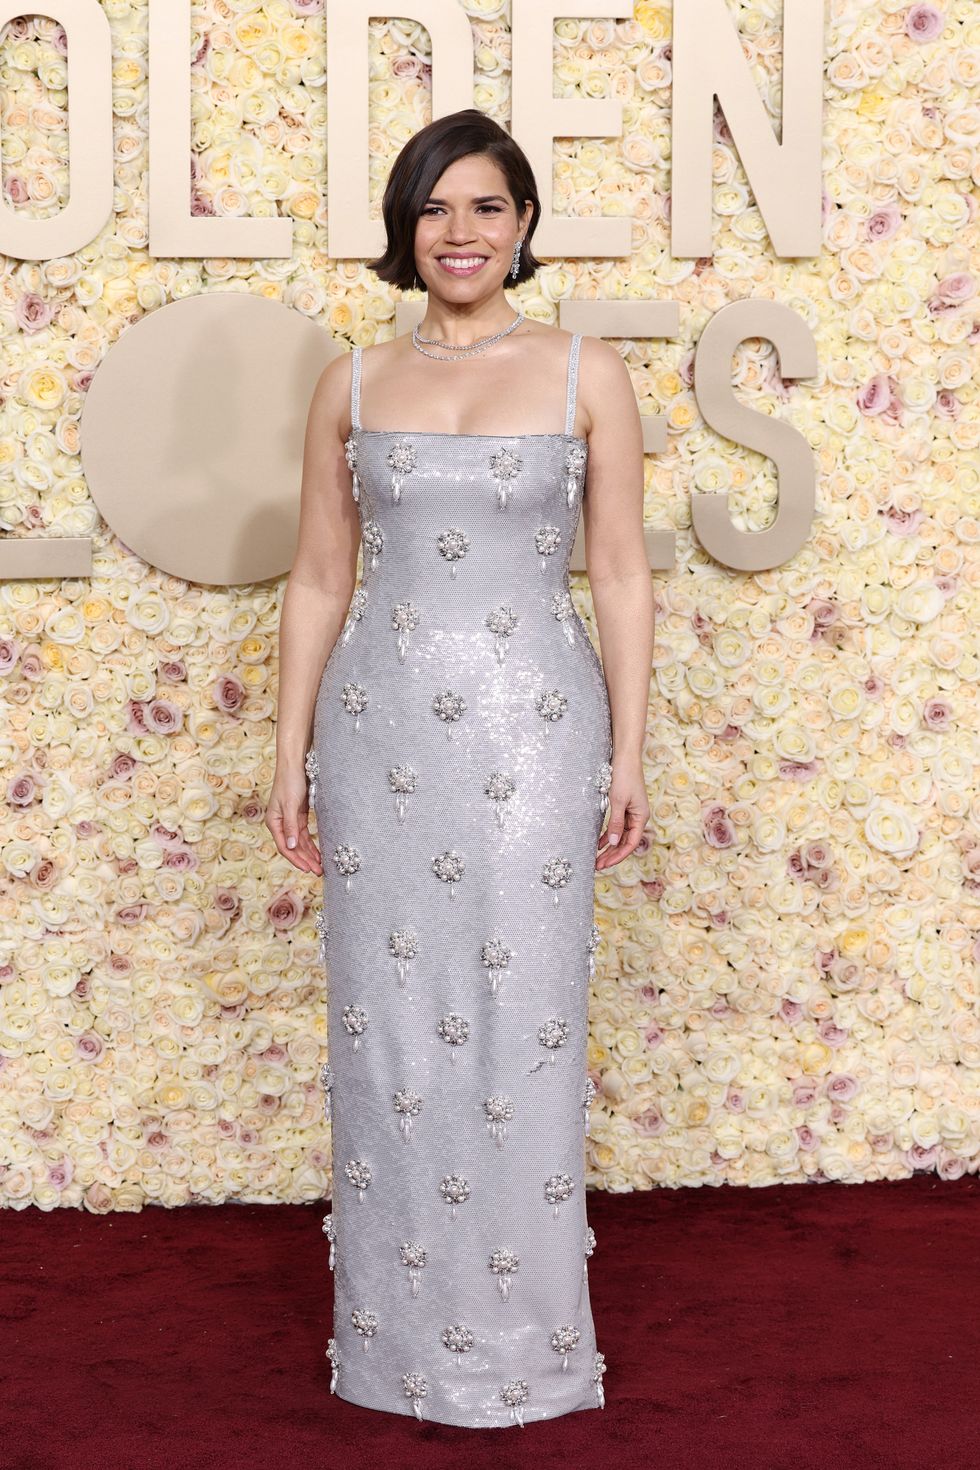 America Ferrera Makes An Entrance In A Silver Sequin Gown Covered In Pearls